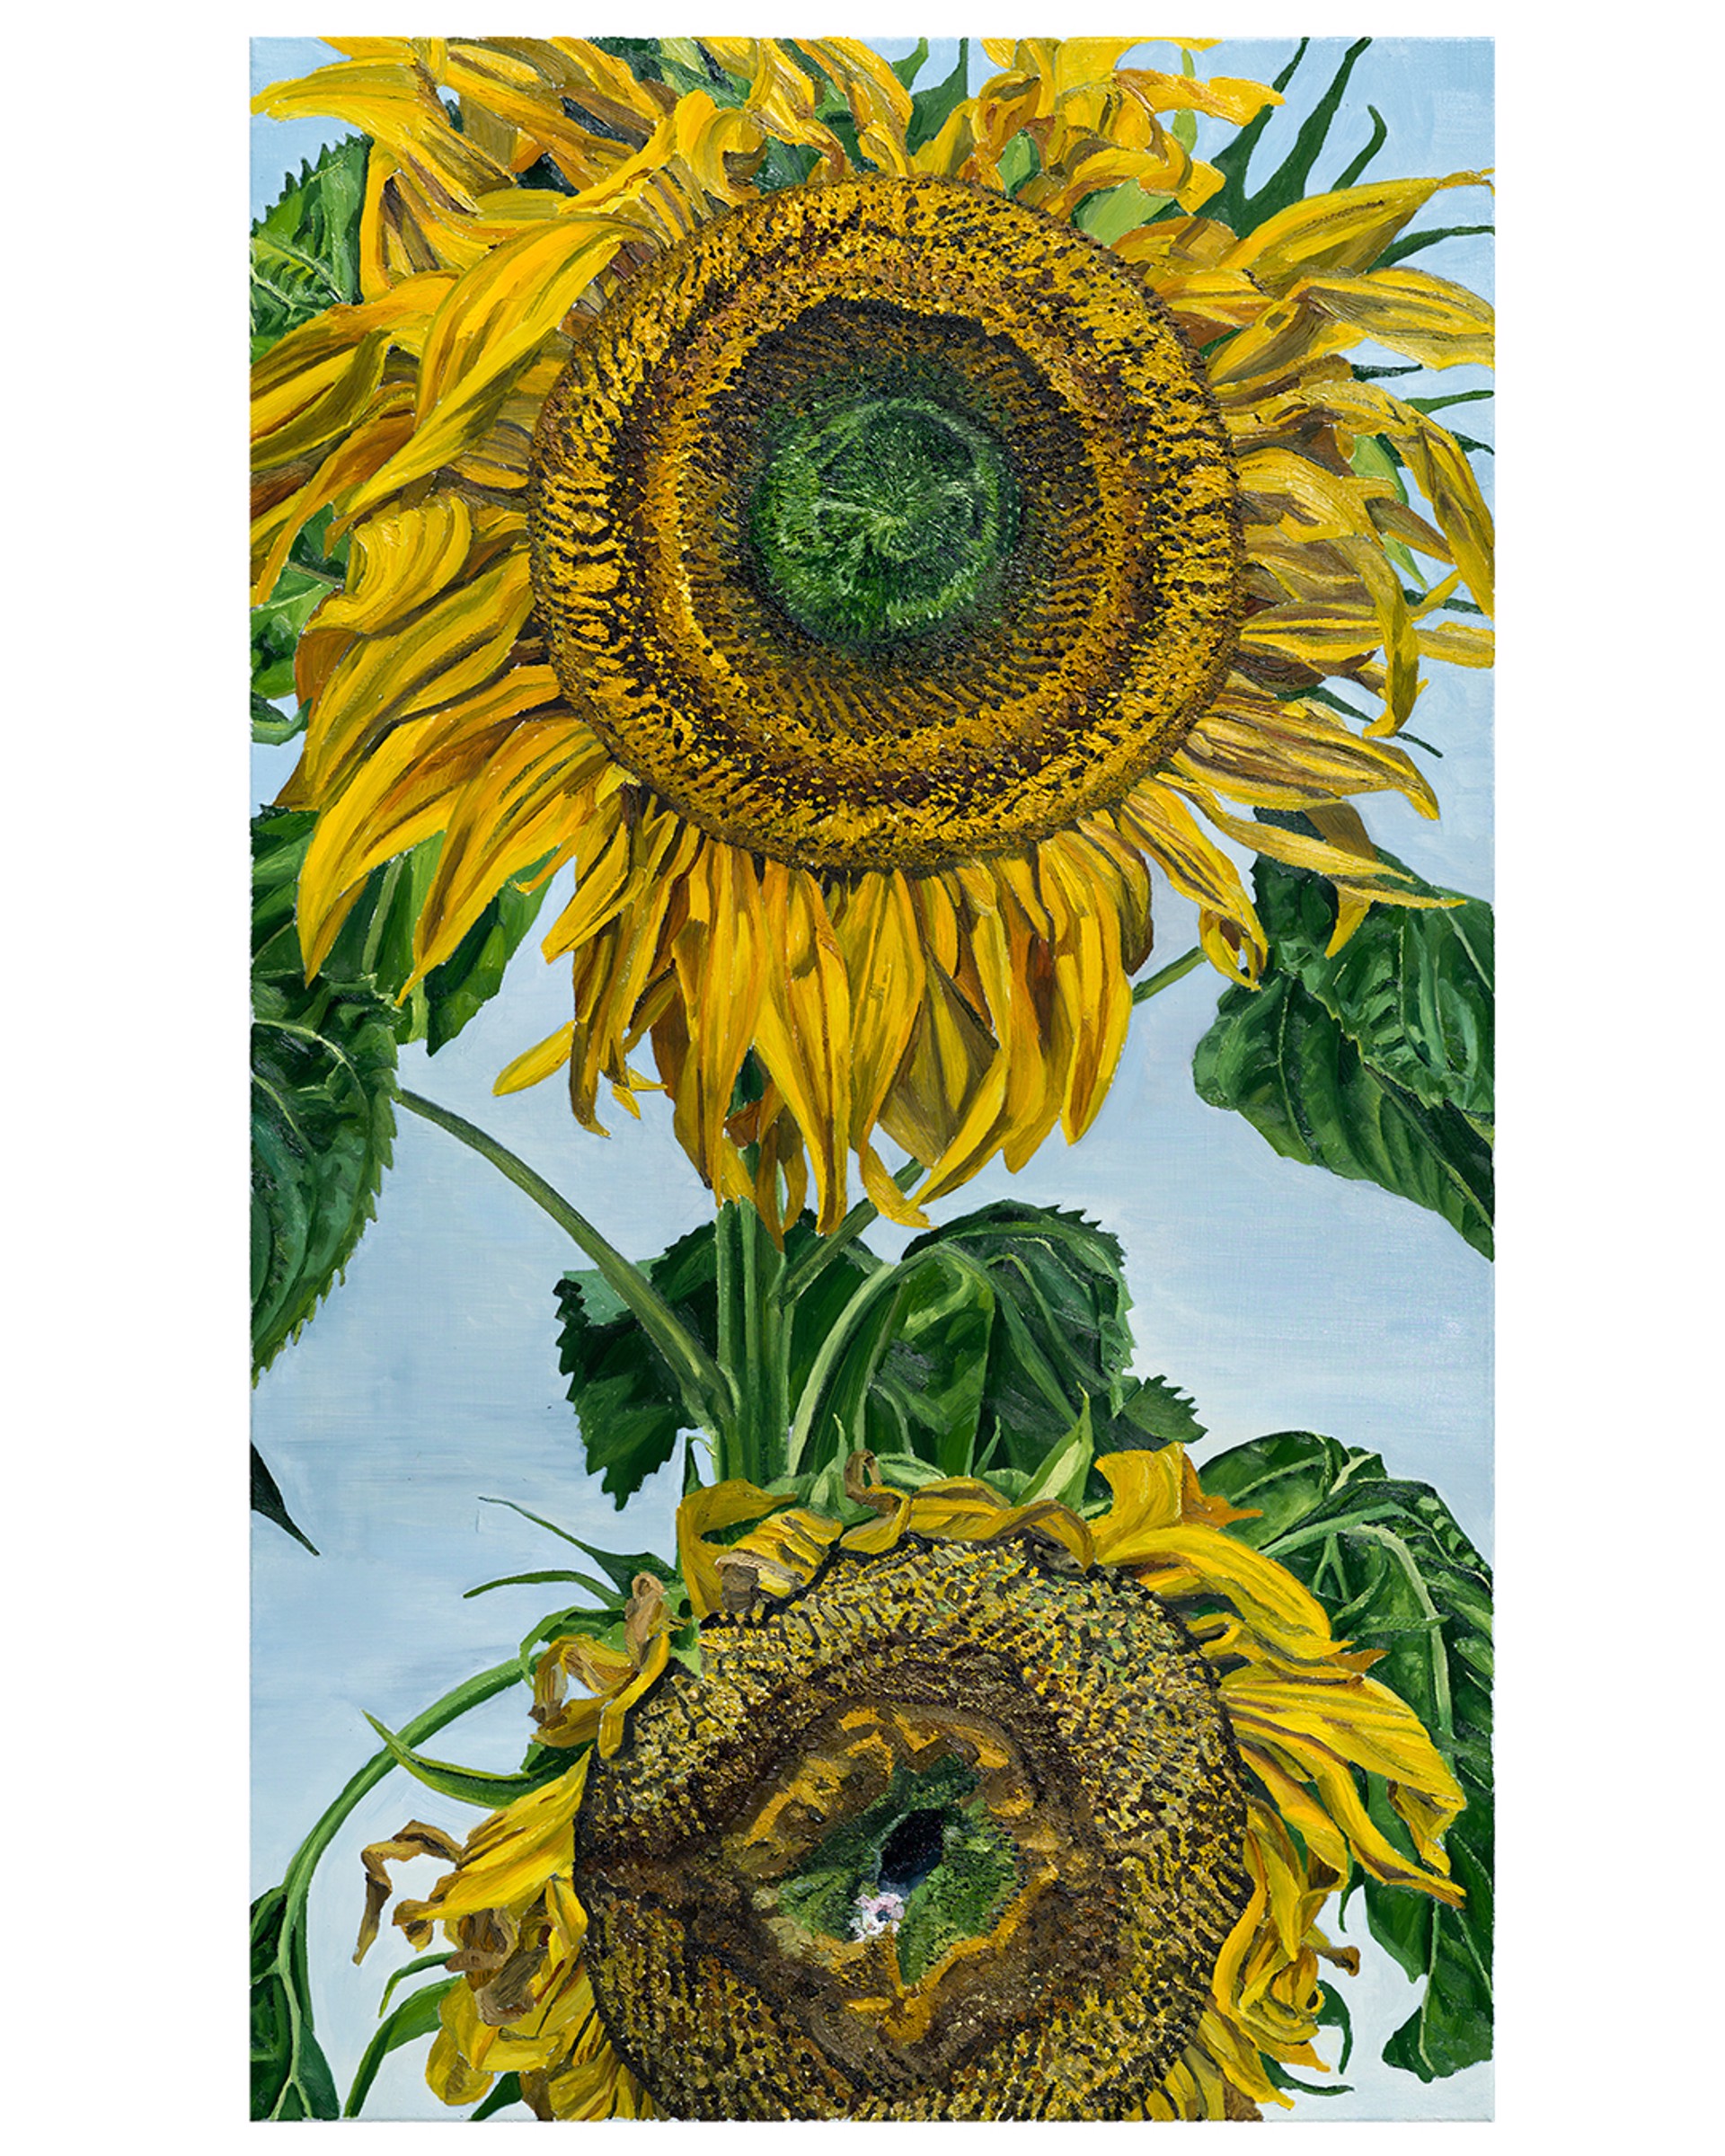 Two Sunflowers by Adam Batchelor